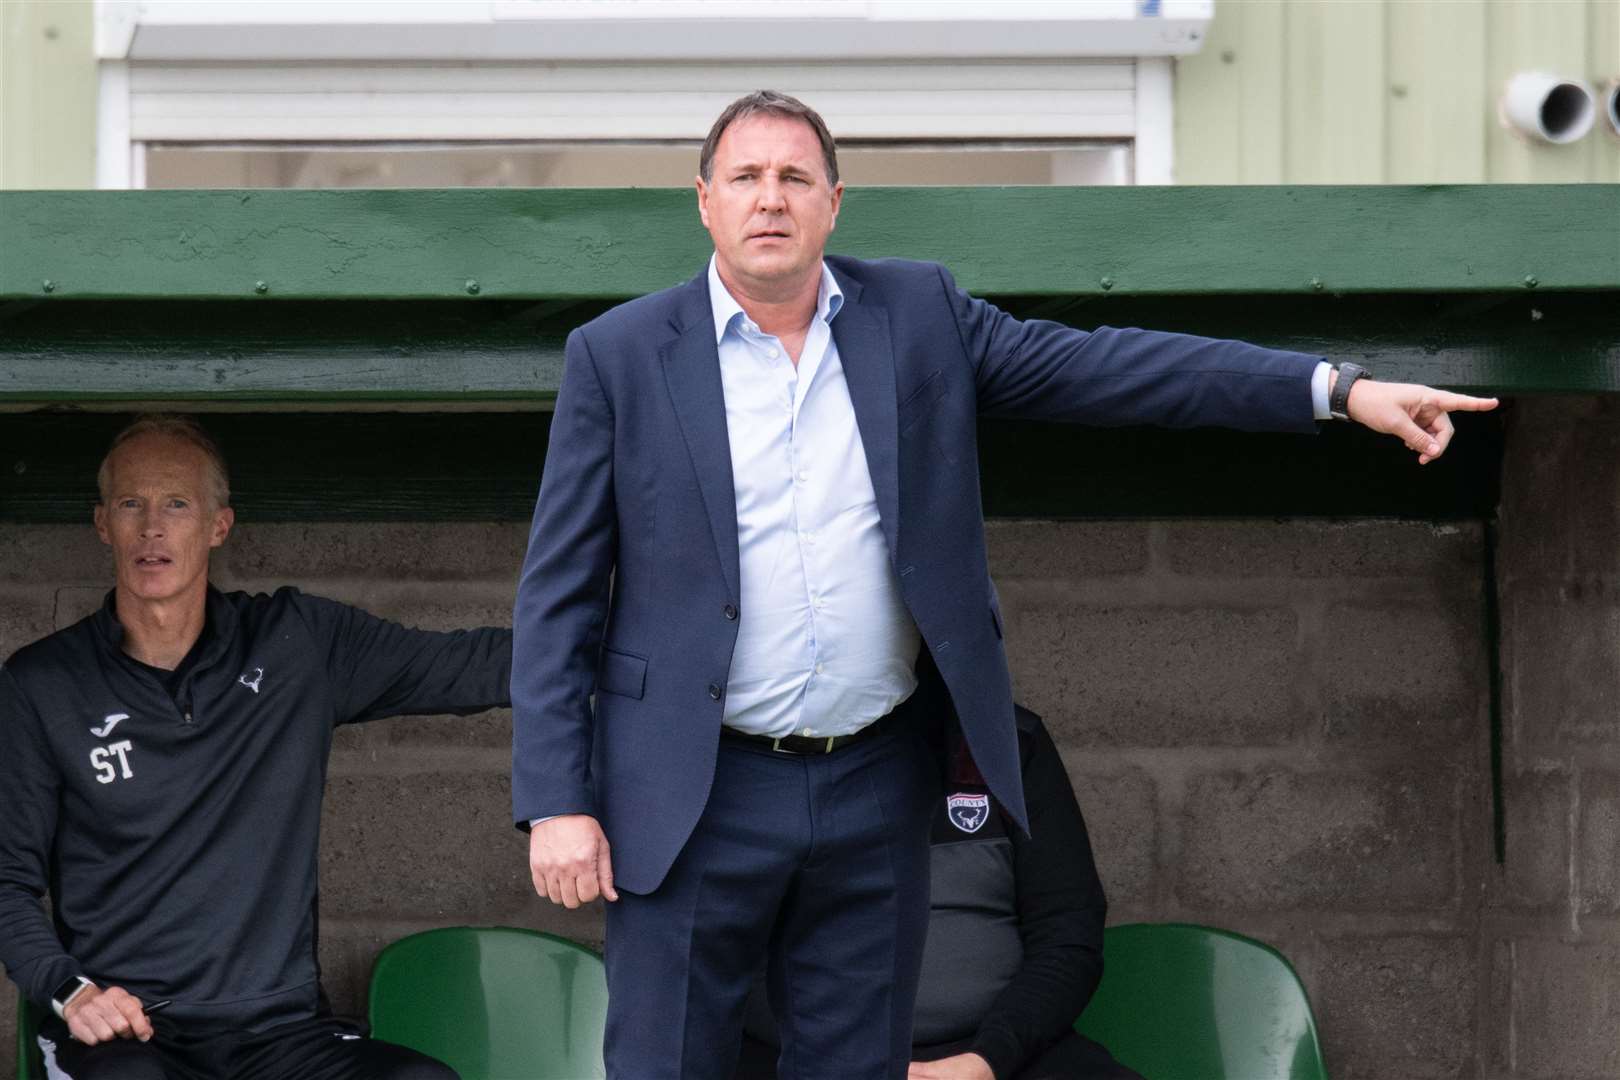 Malky Mackay watched Ross County score seven goals against East Fife yesterday. Picture: Daniel Forsyth